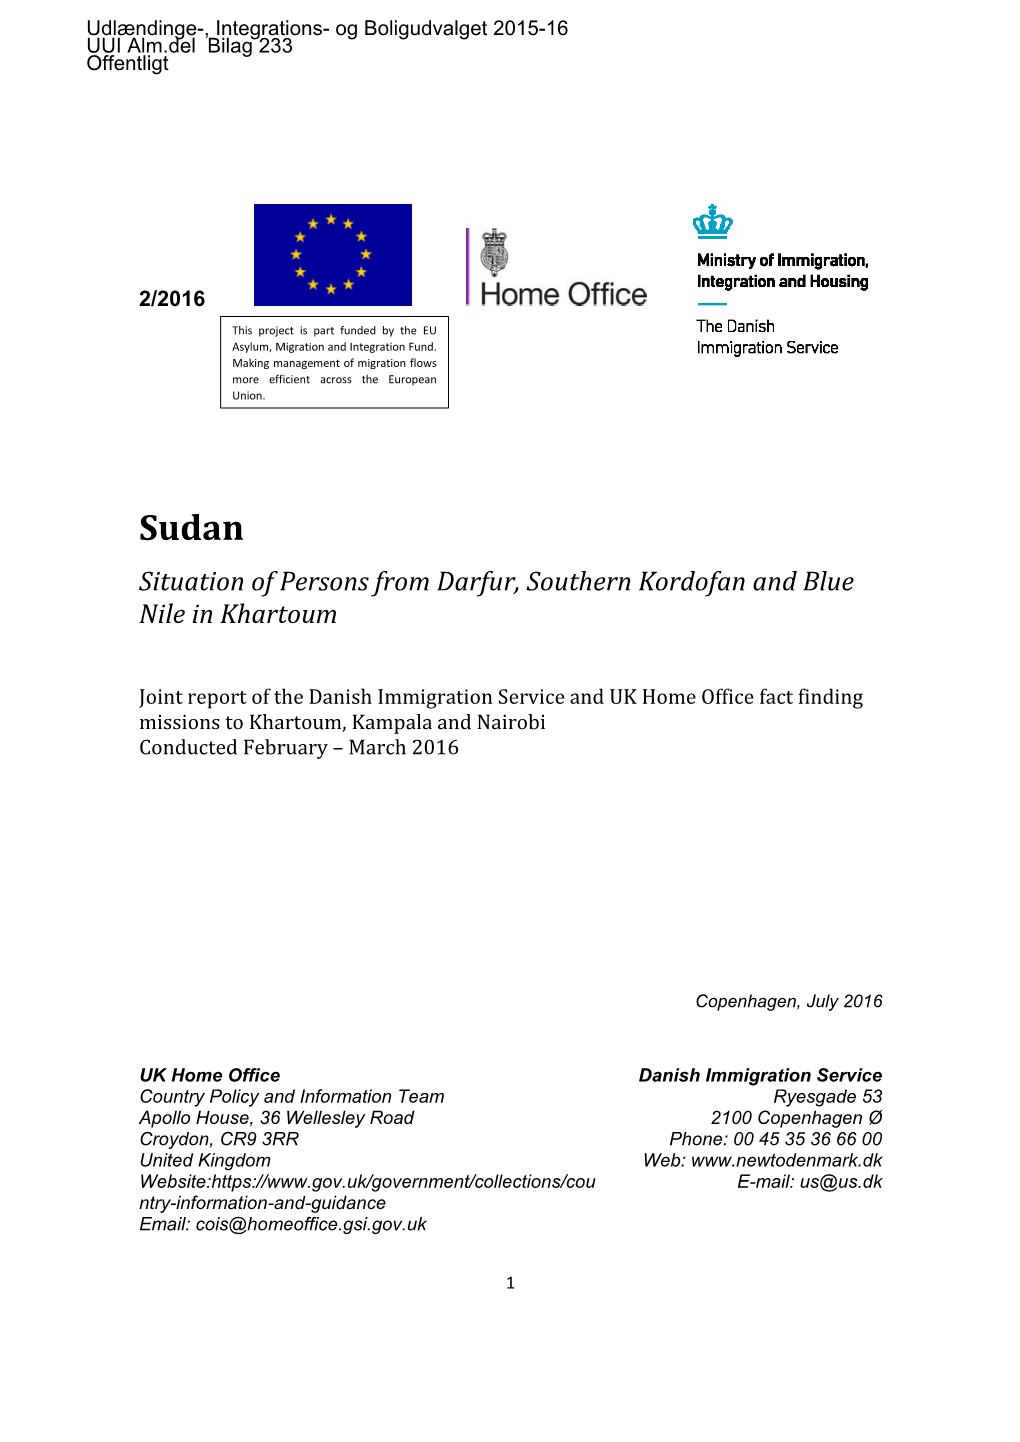 Situation of Persons from Darfur, Southern Kordofan and Blue Nile in Khartoum